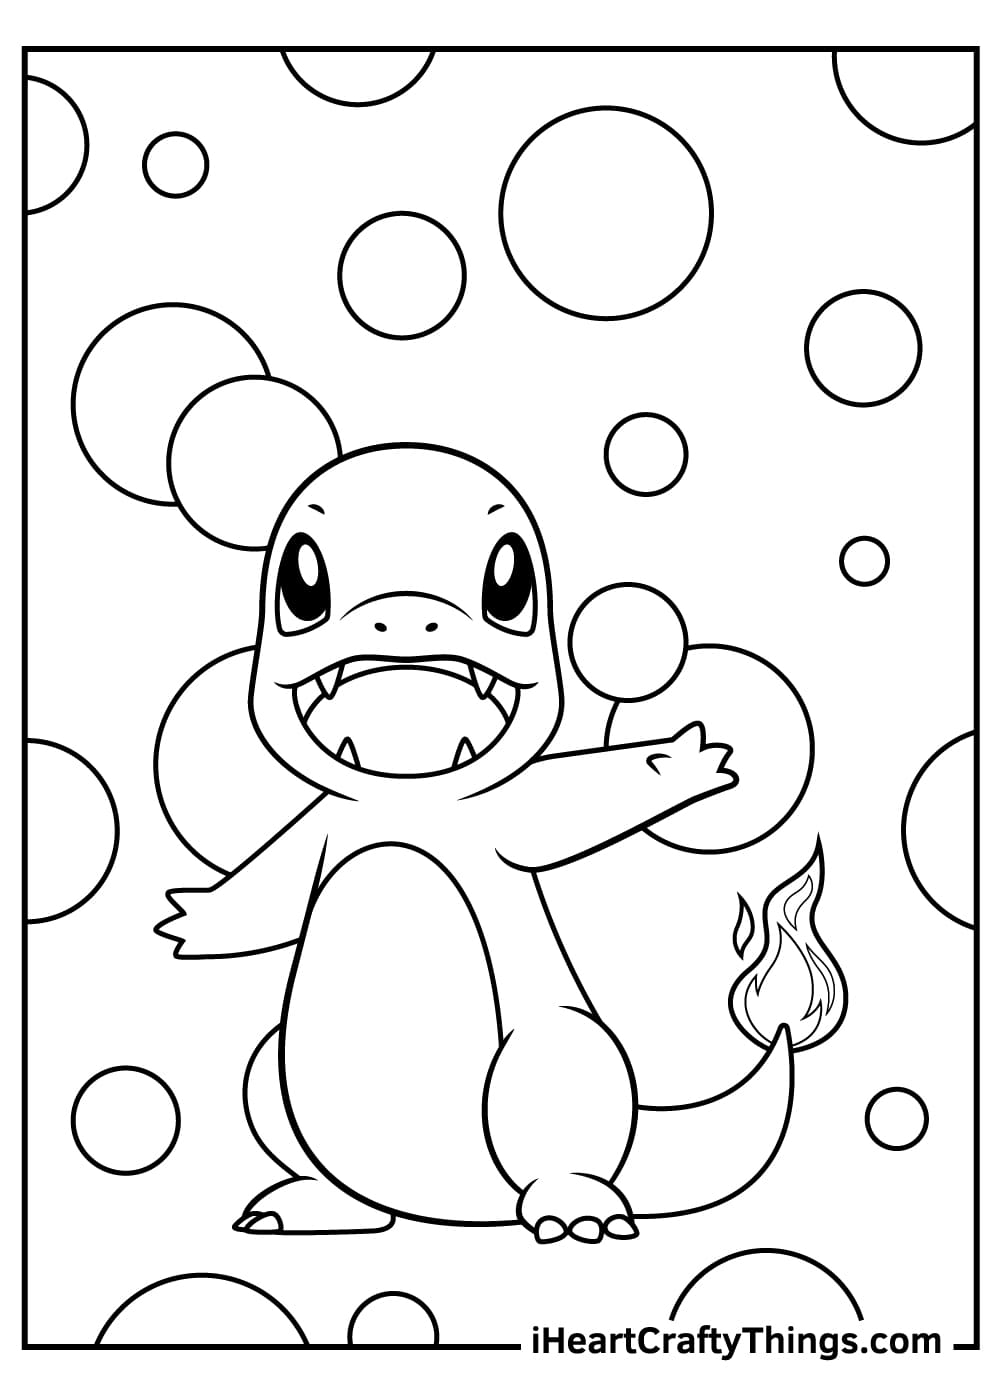 Charmander Cute Image Coloring Page